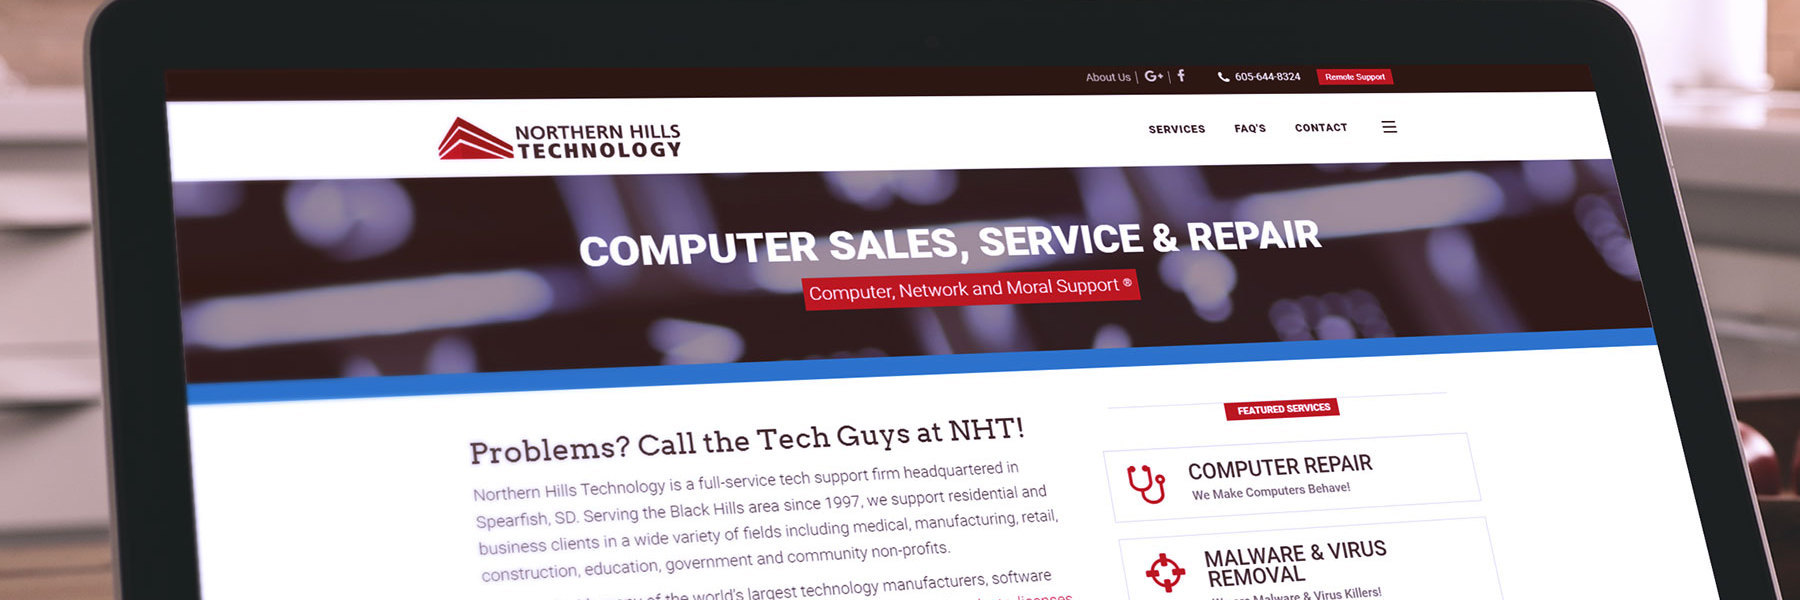 Northern Hills Technology website shown on a laptop